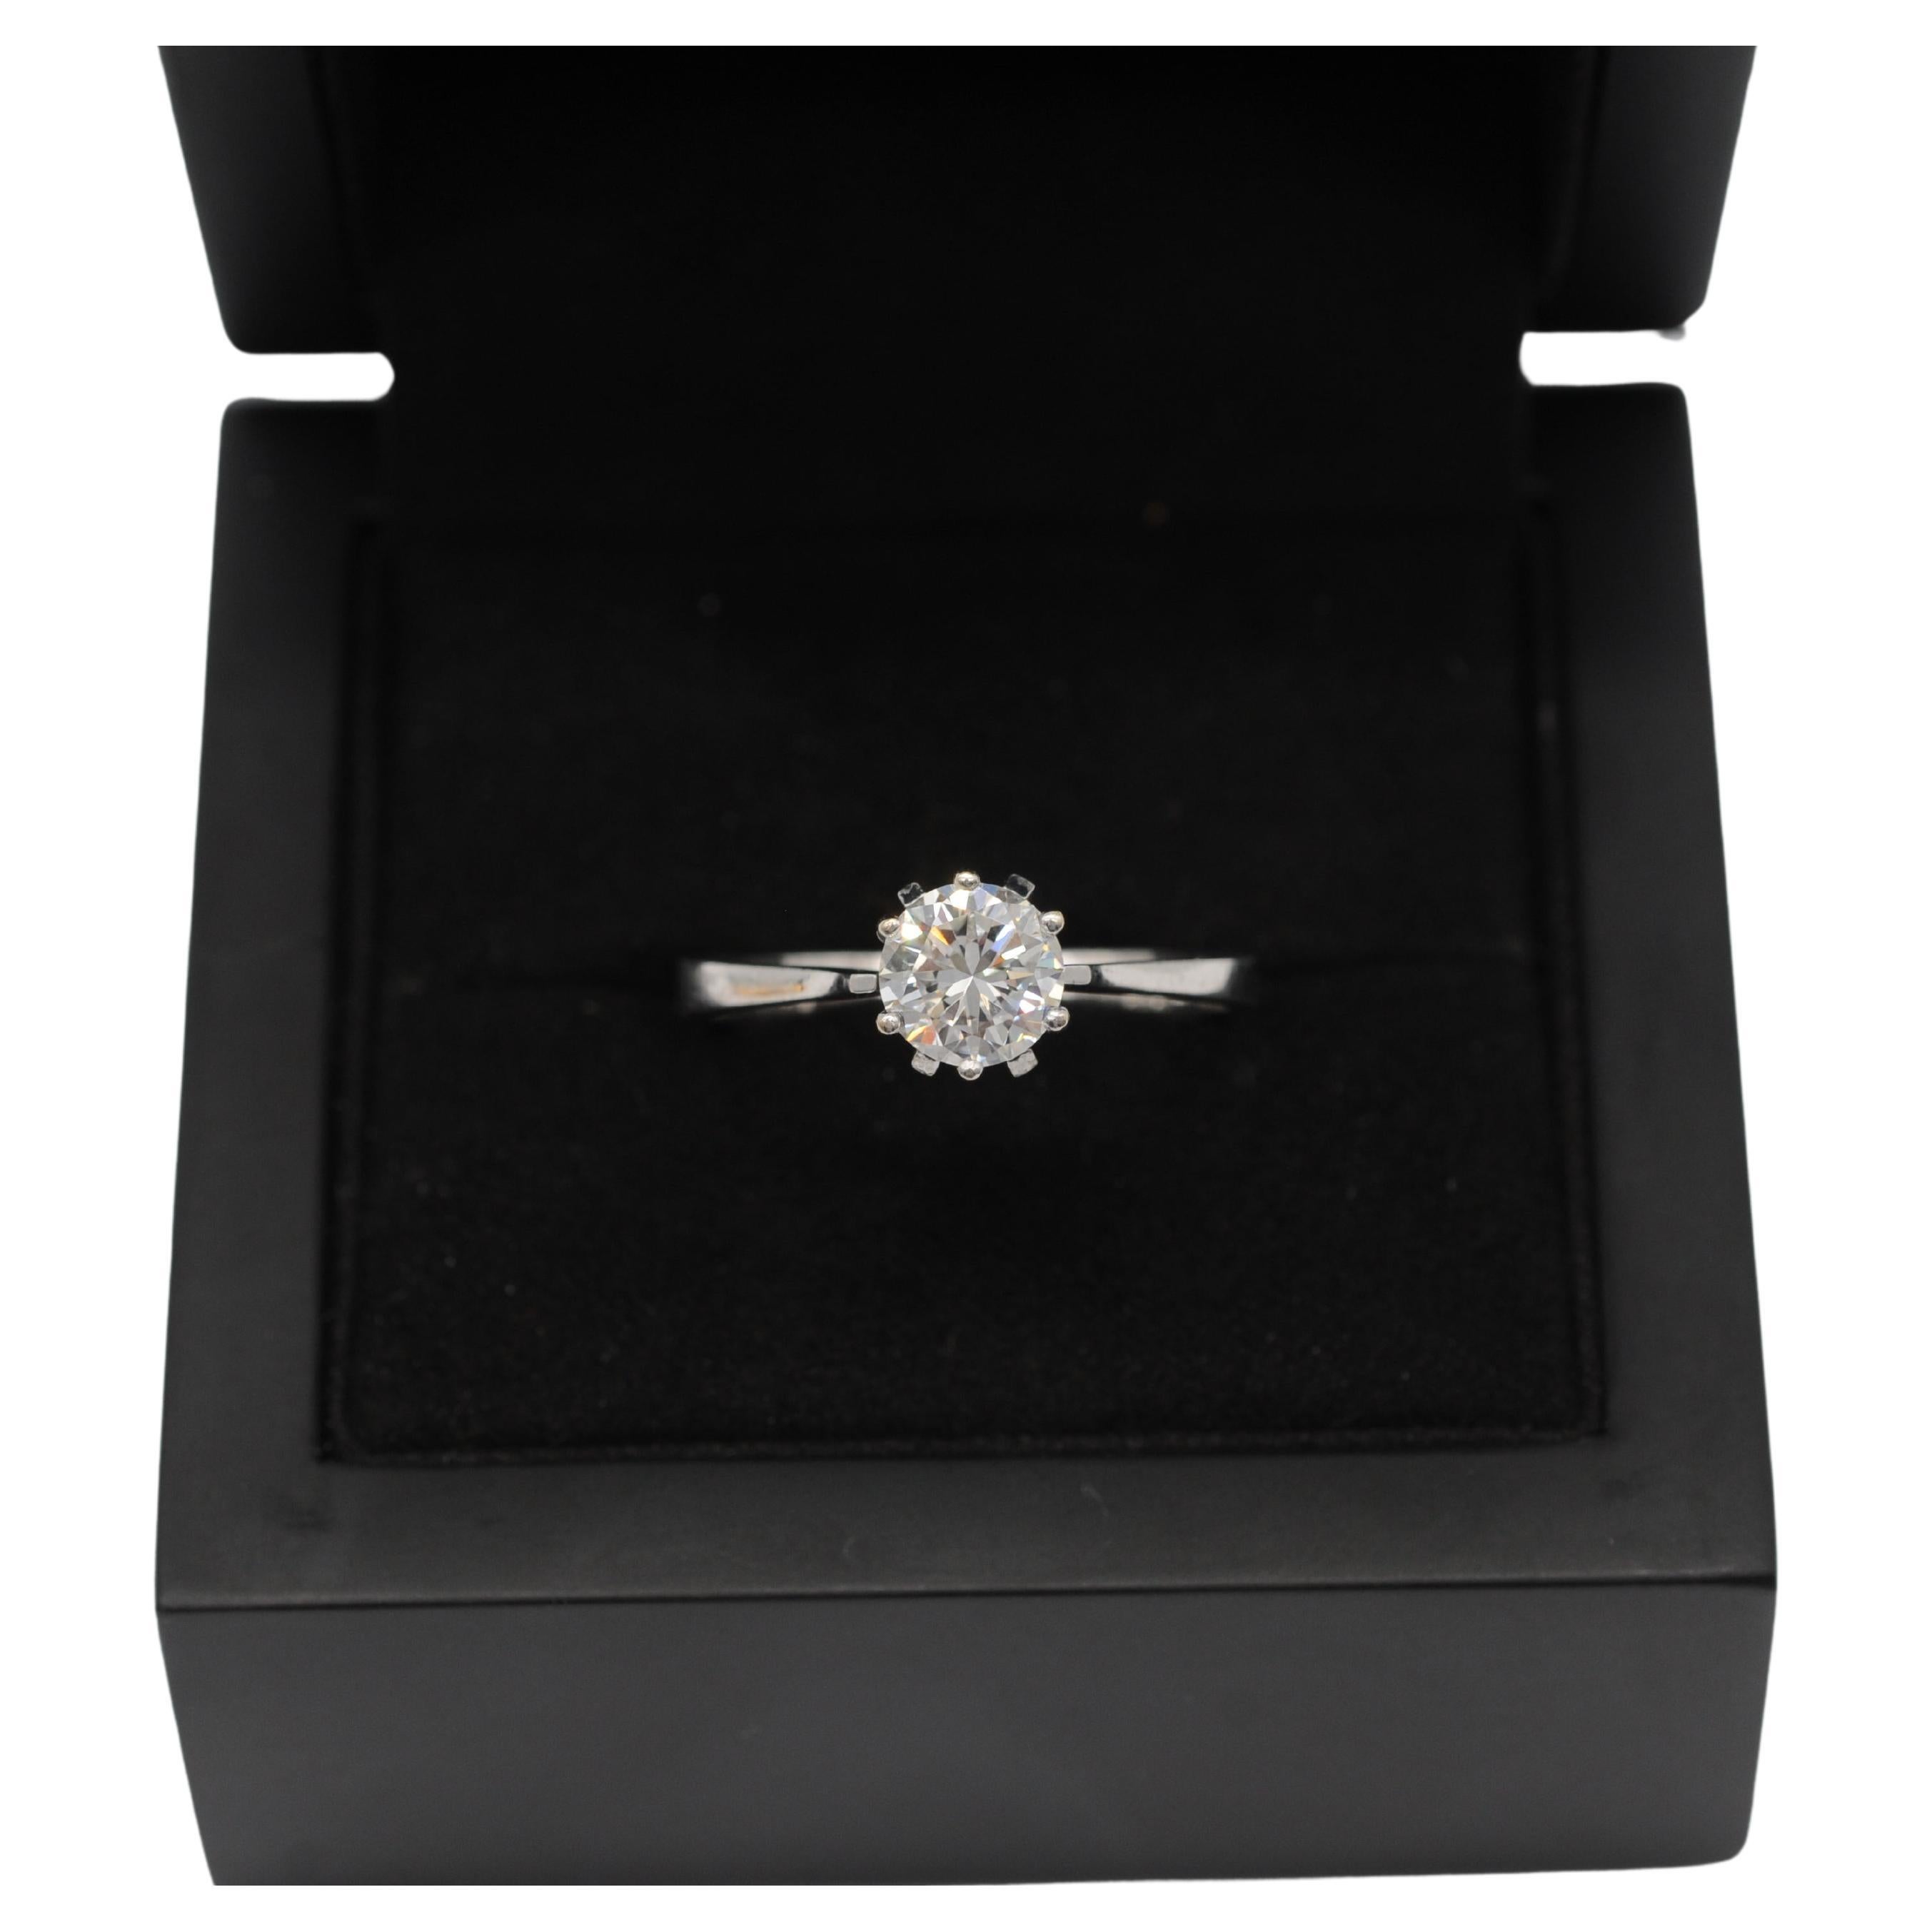 Majestic solitare Ring with ca: 1.0ct diamond VVS2 Color:G For Sale